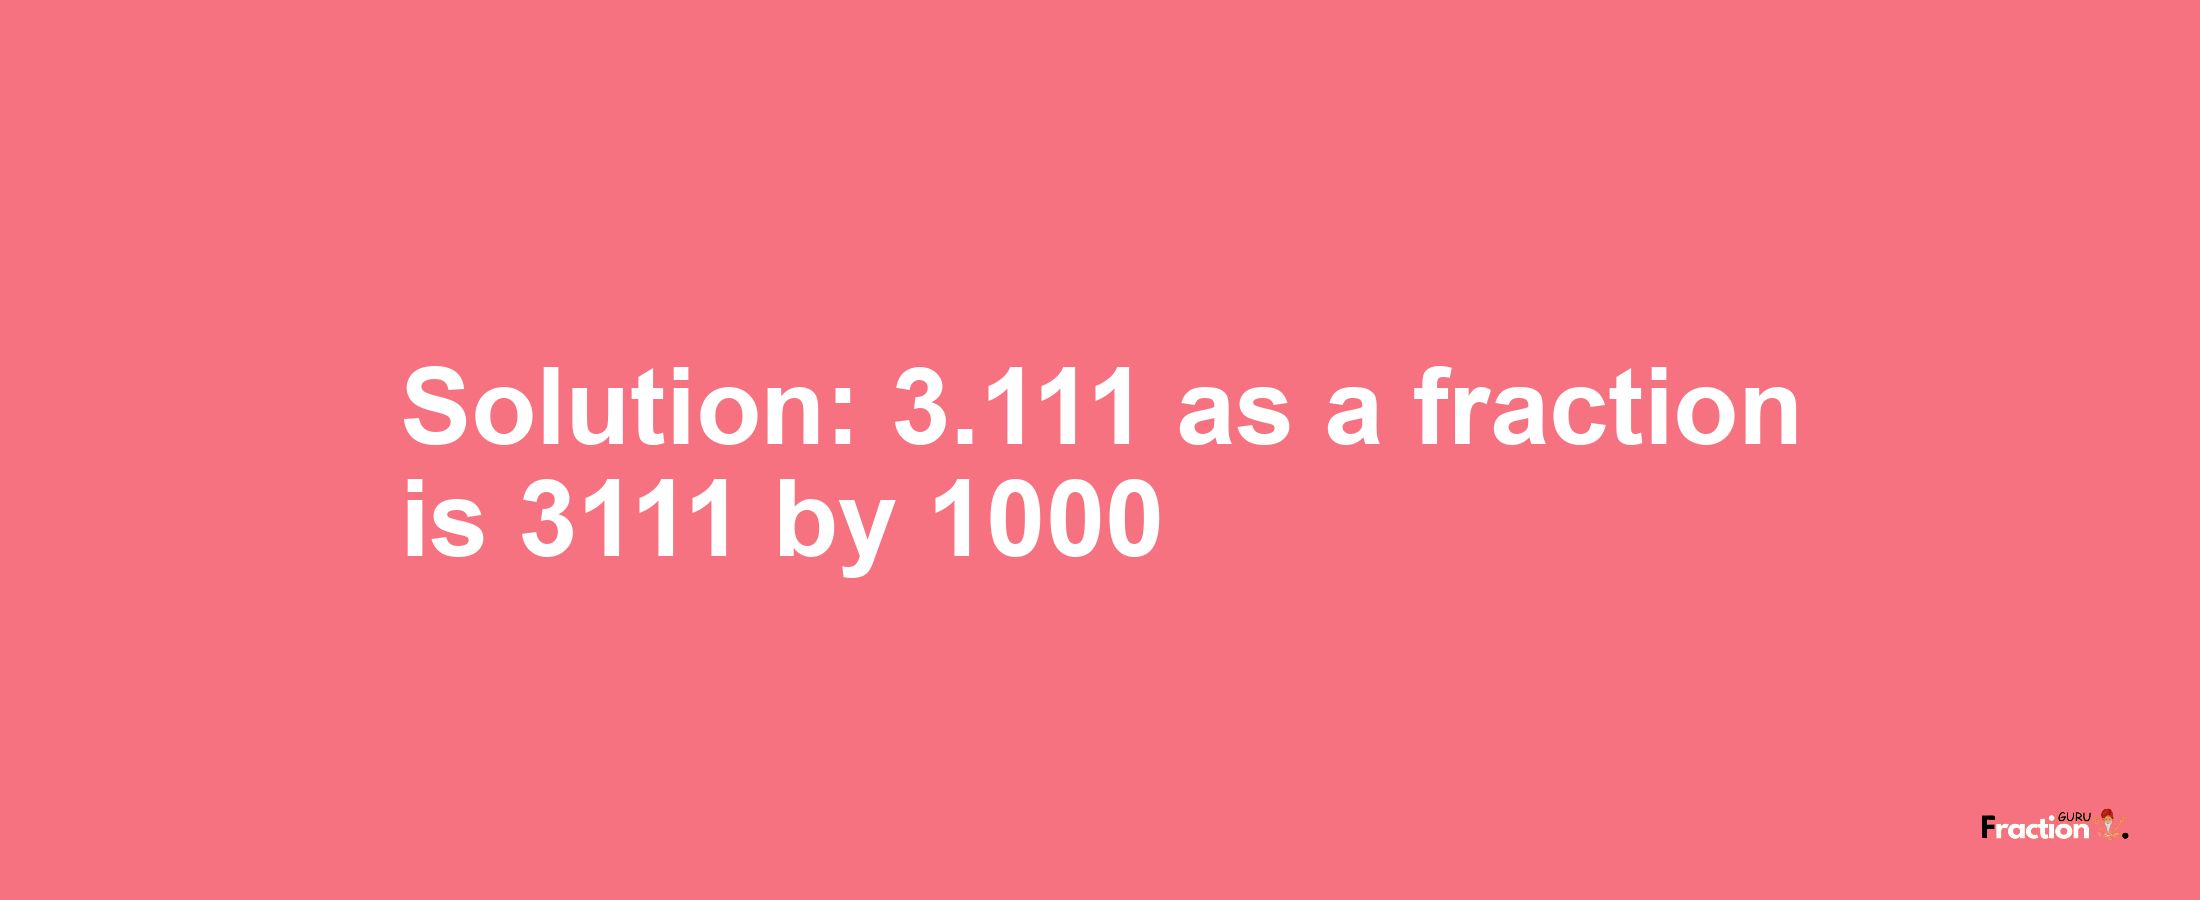 Solution:3.111 as a fraction is 3111/1000